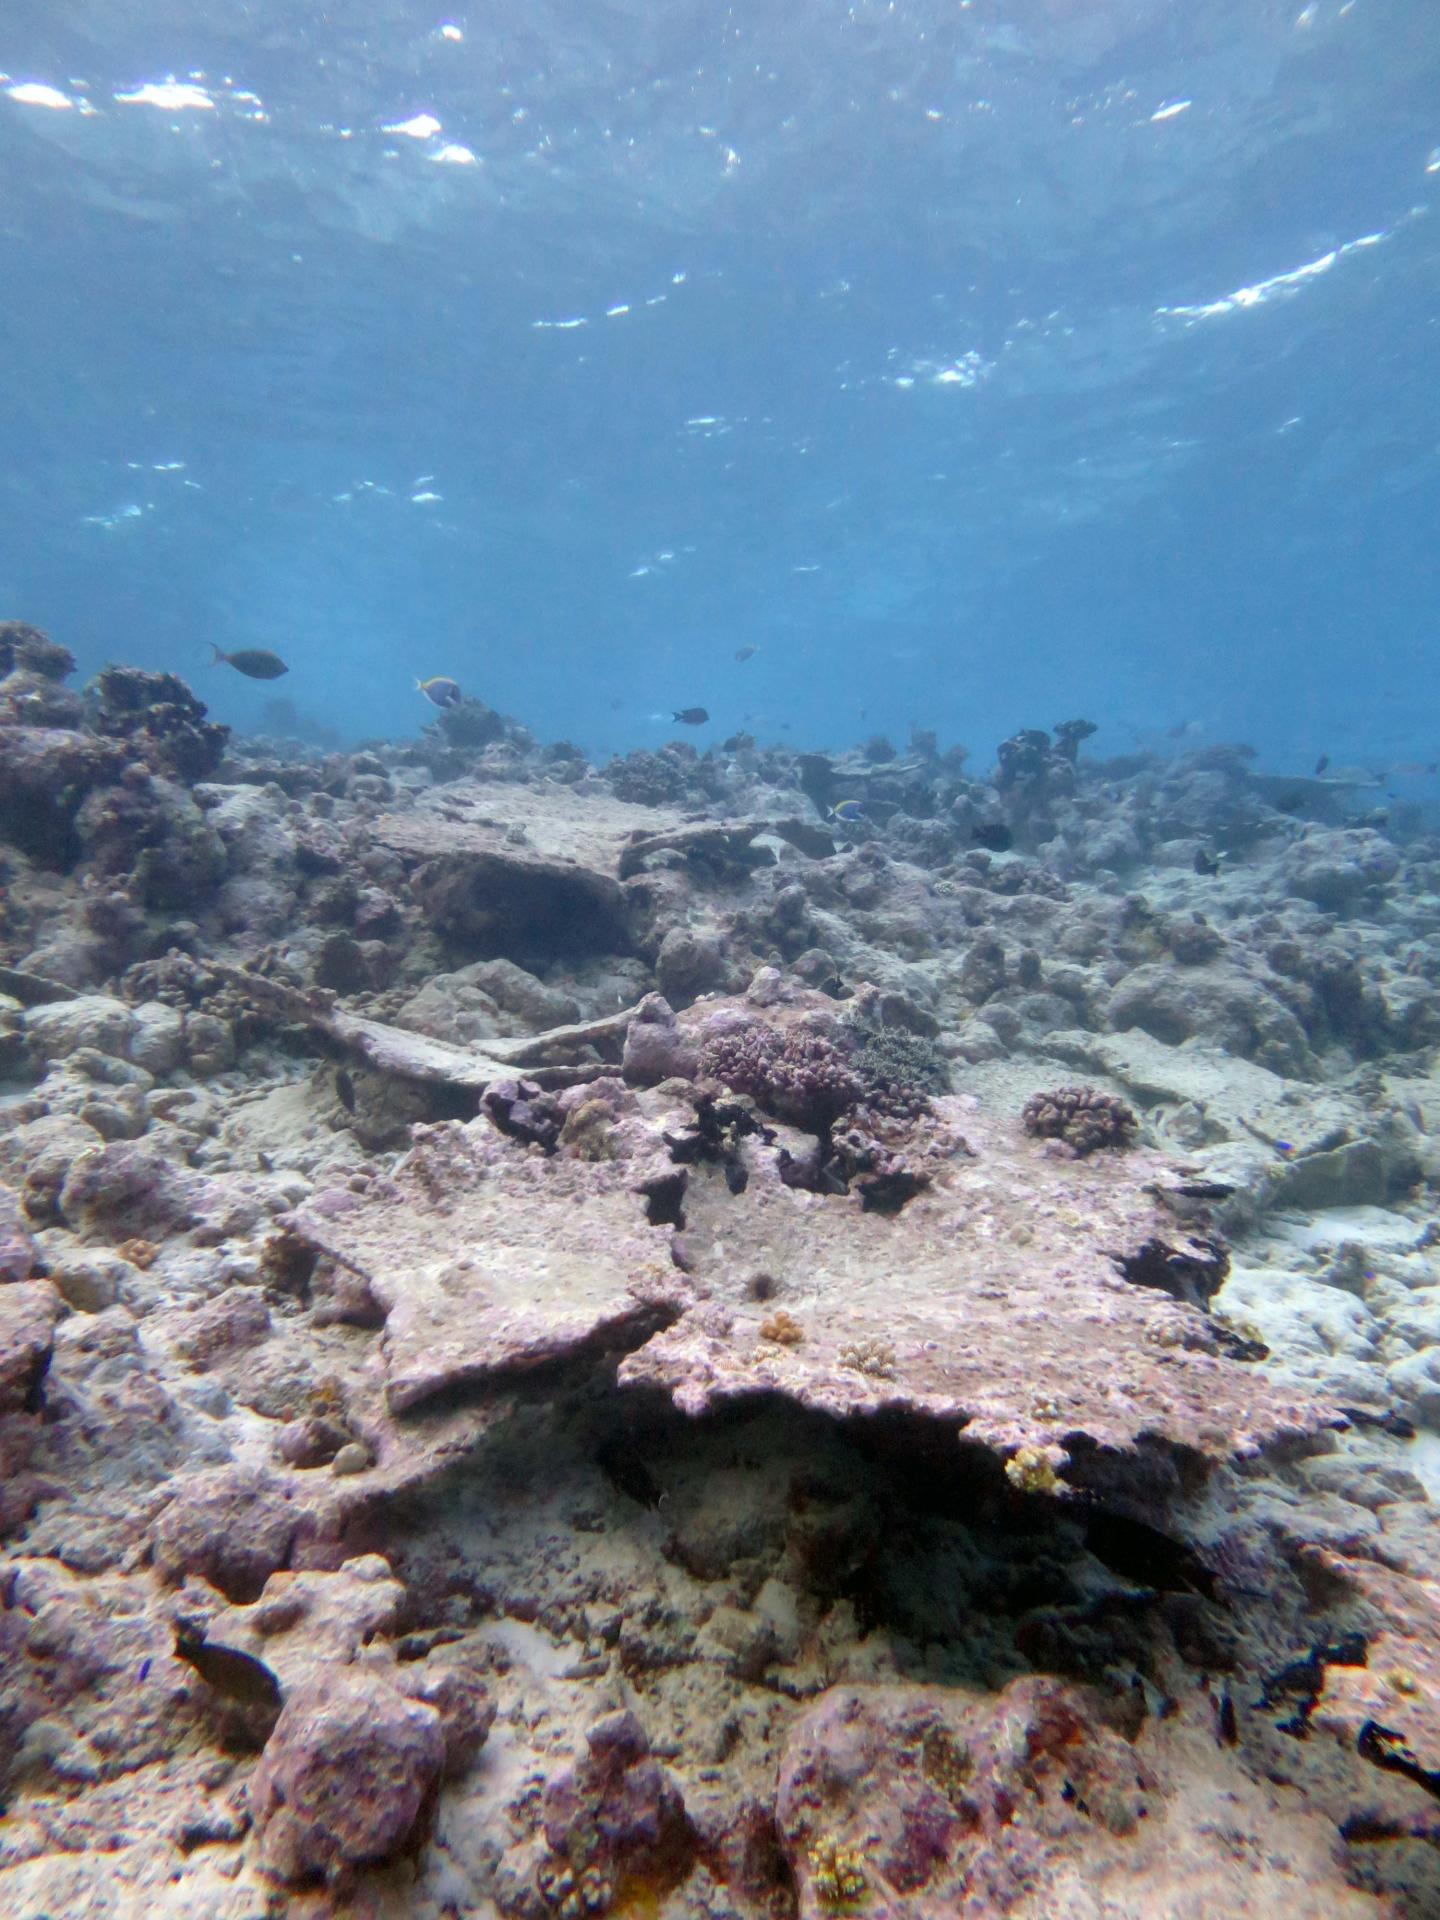 Section of Reef